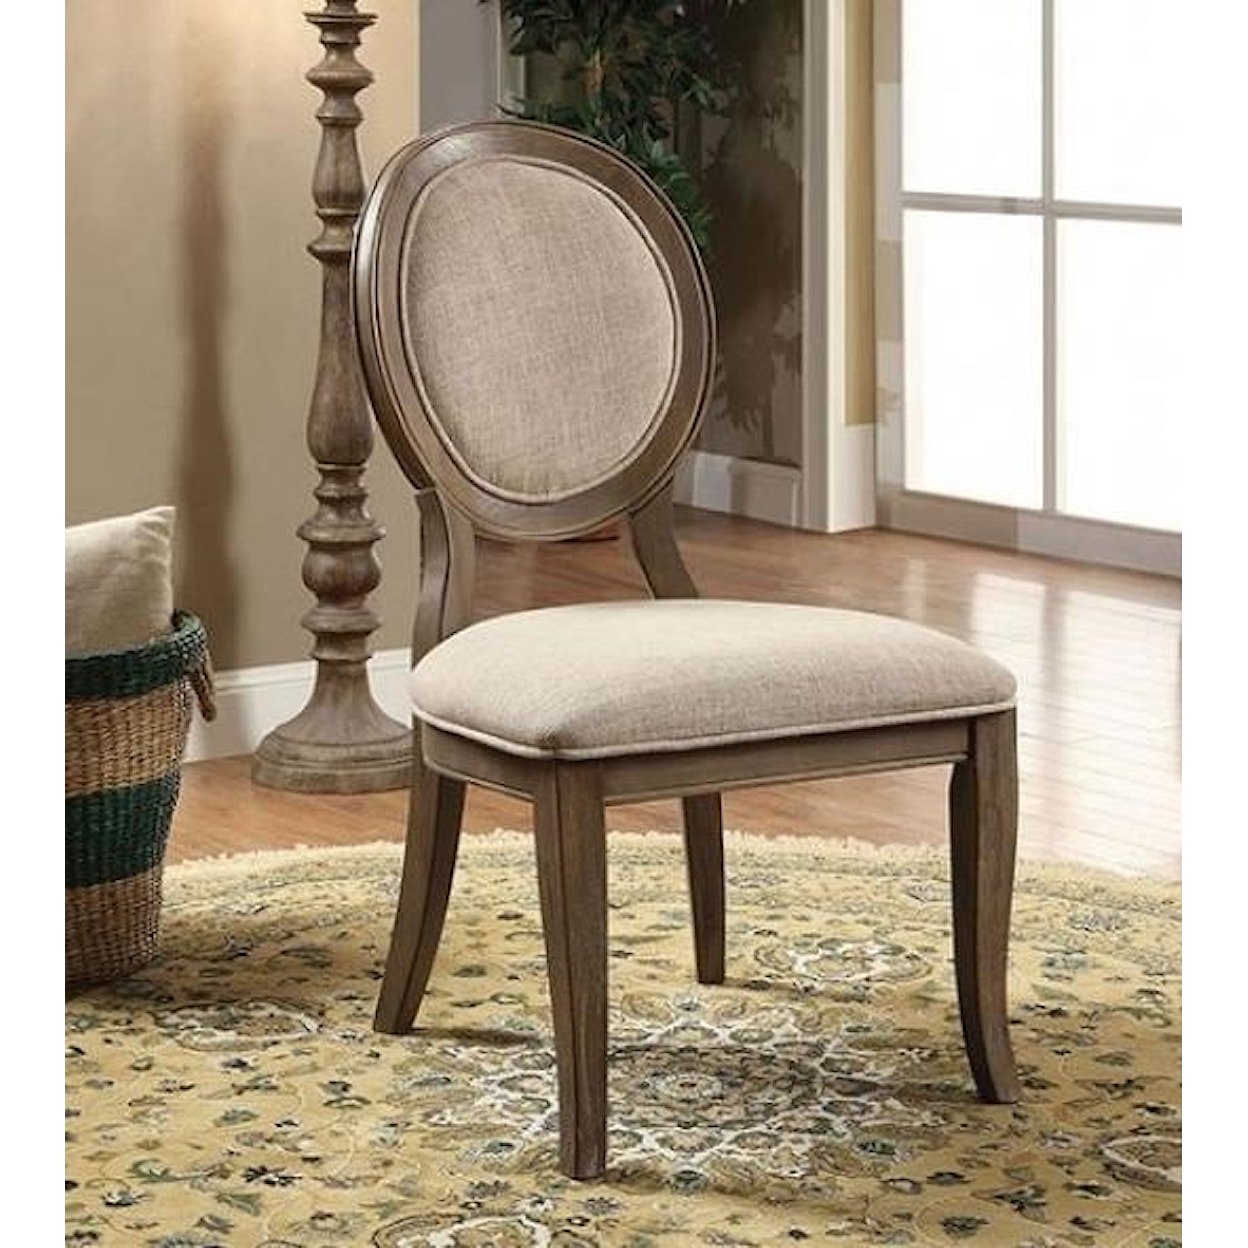 FUSA Kathryn Side Chair, 2 Pack